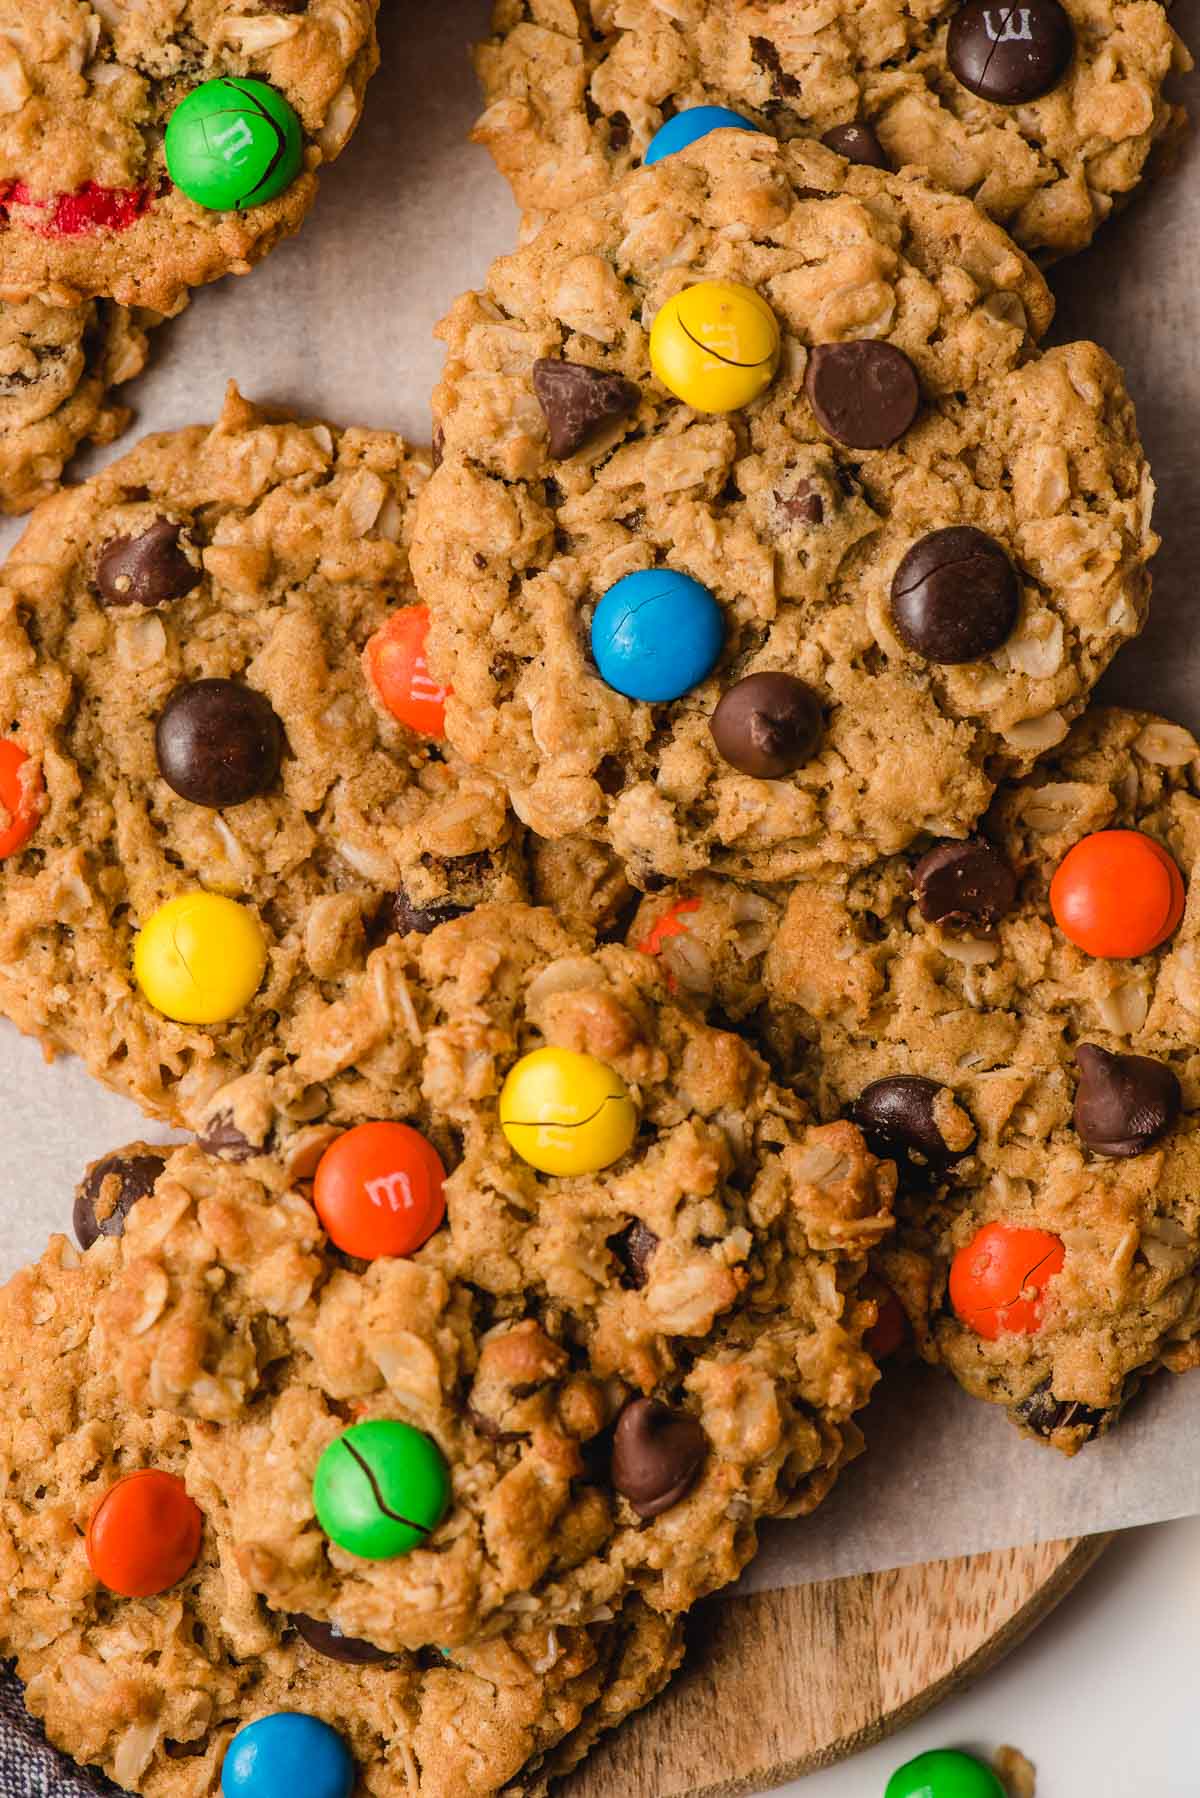 A pile of Gluten Free Monster Cookies with M&Ms.